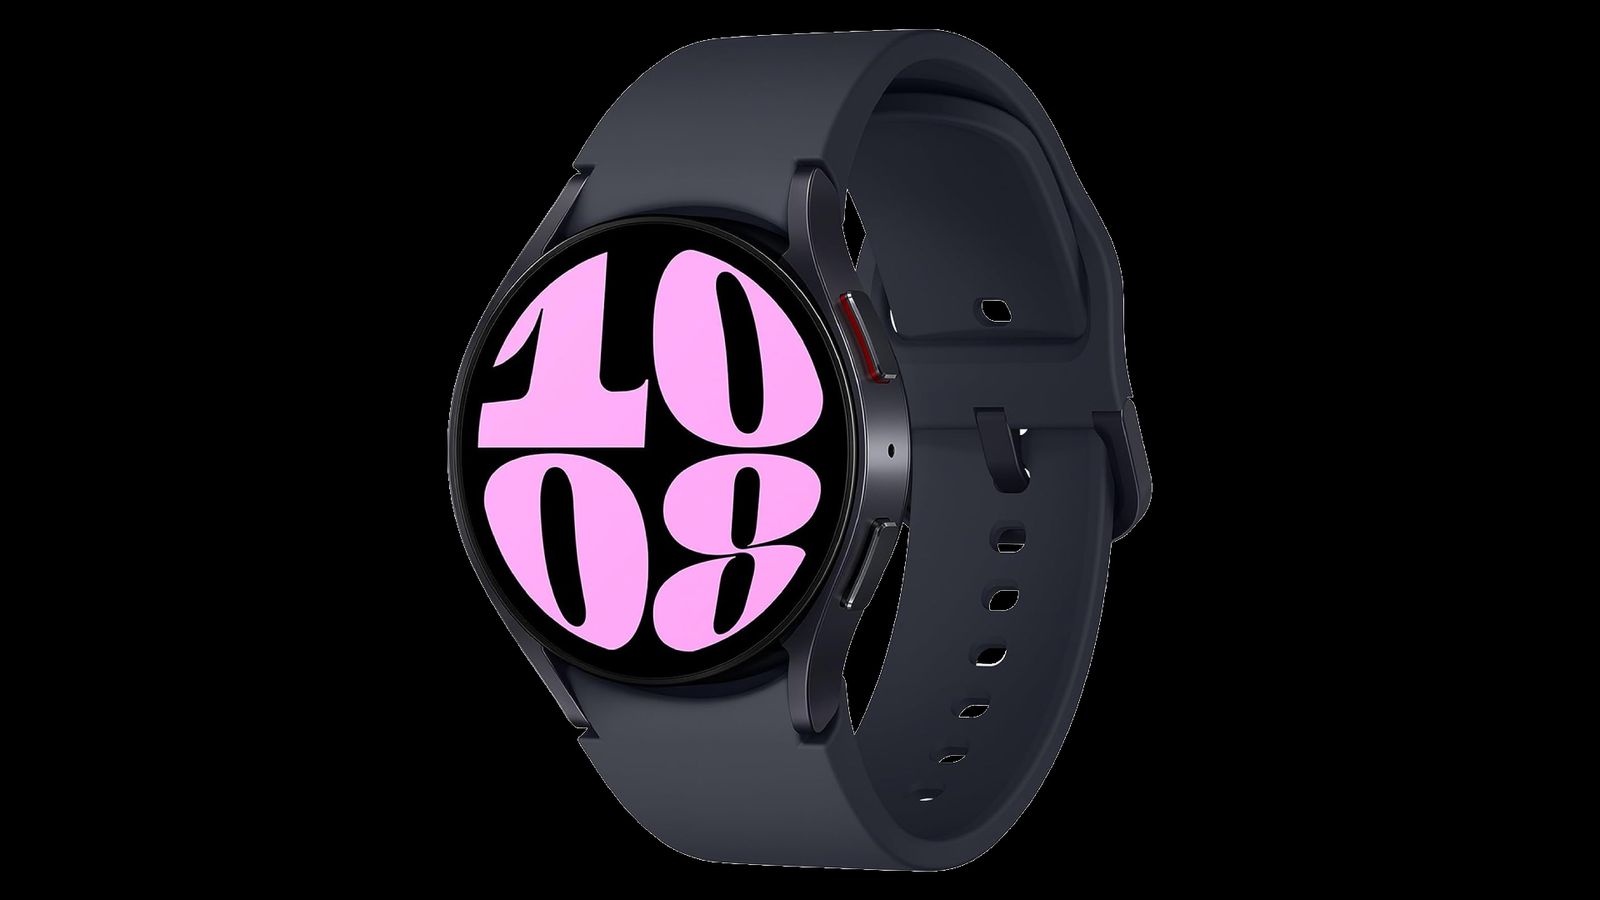 Samsung Galaxy Watch 6 product image of a black smartwatch with the time 10:08 in pink covering almost the entire display.